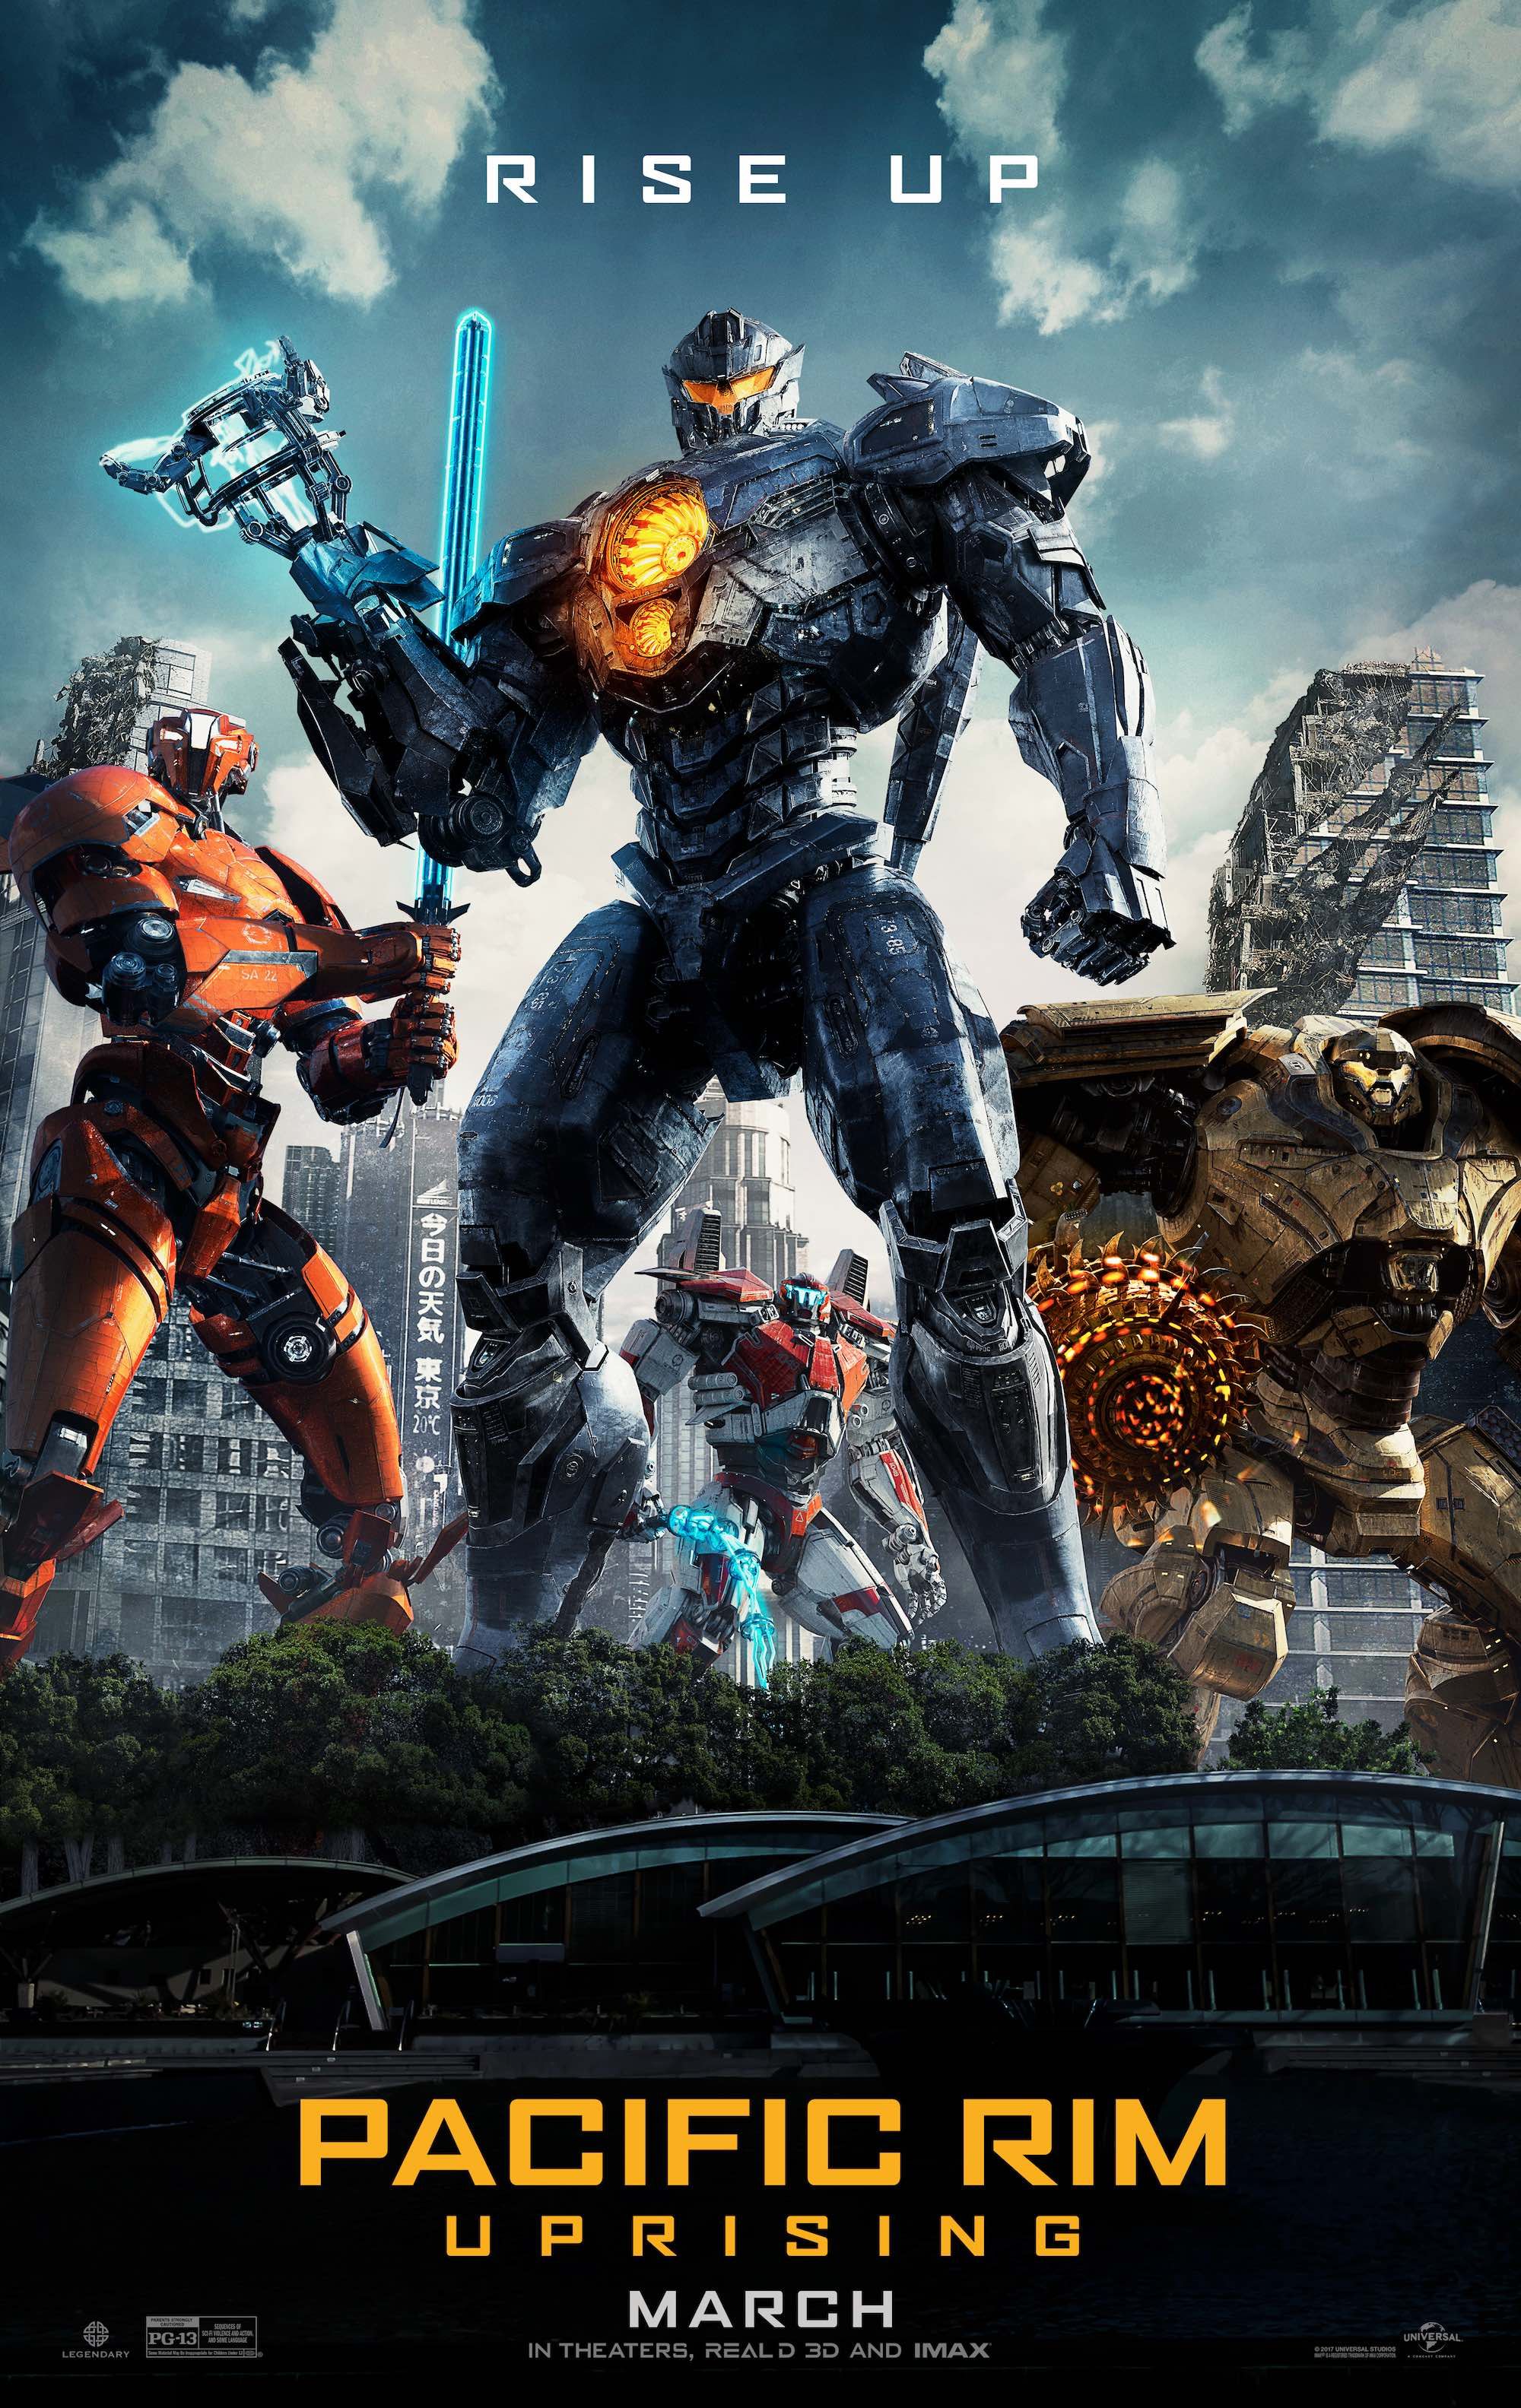 Pacific Rim Uprising Trailer: Join the Jaeger Uprising #NYCC